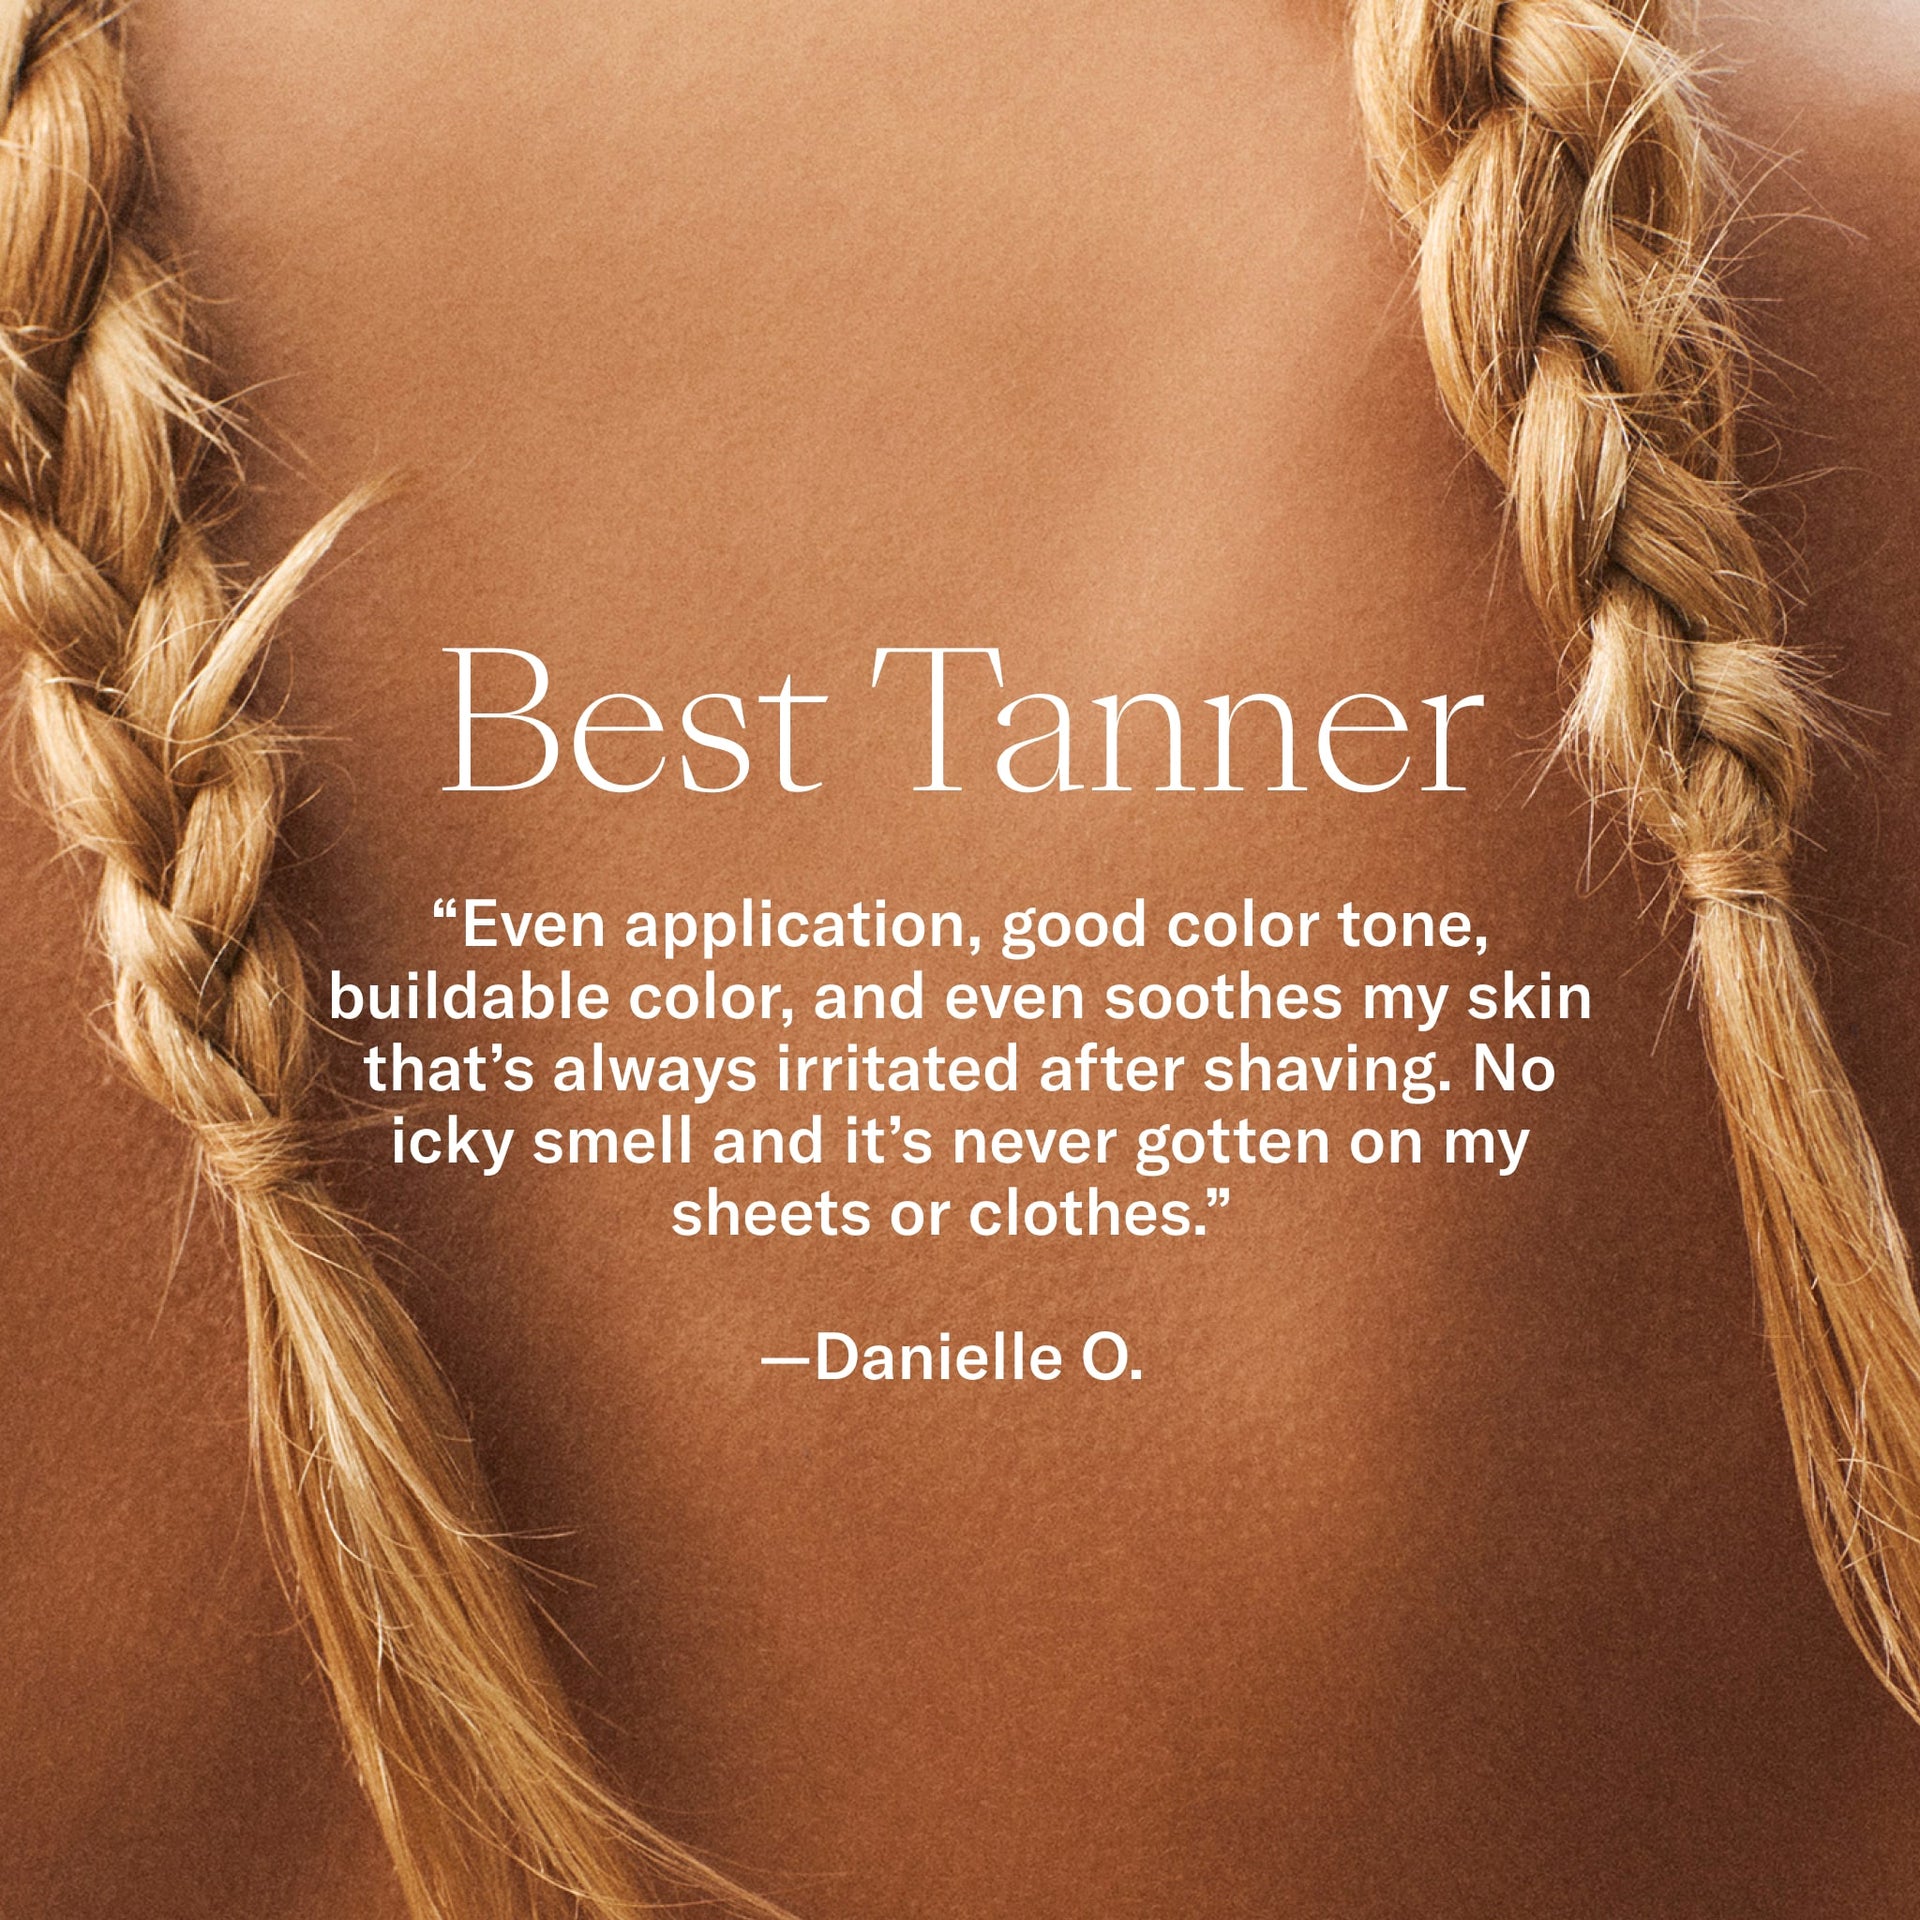 Best Tanner. Review. Danielle O.